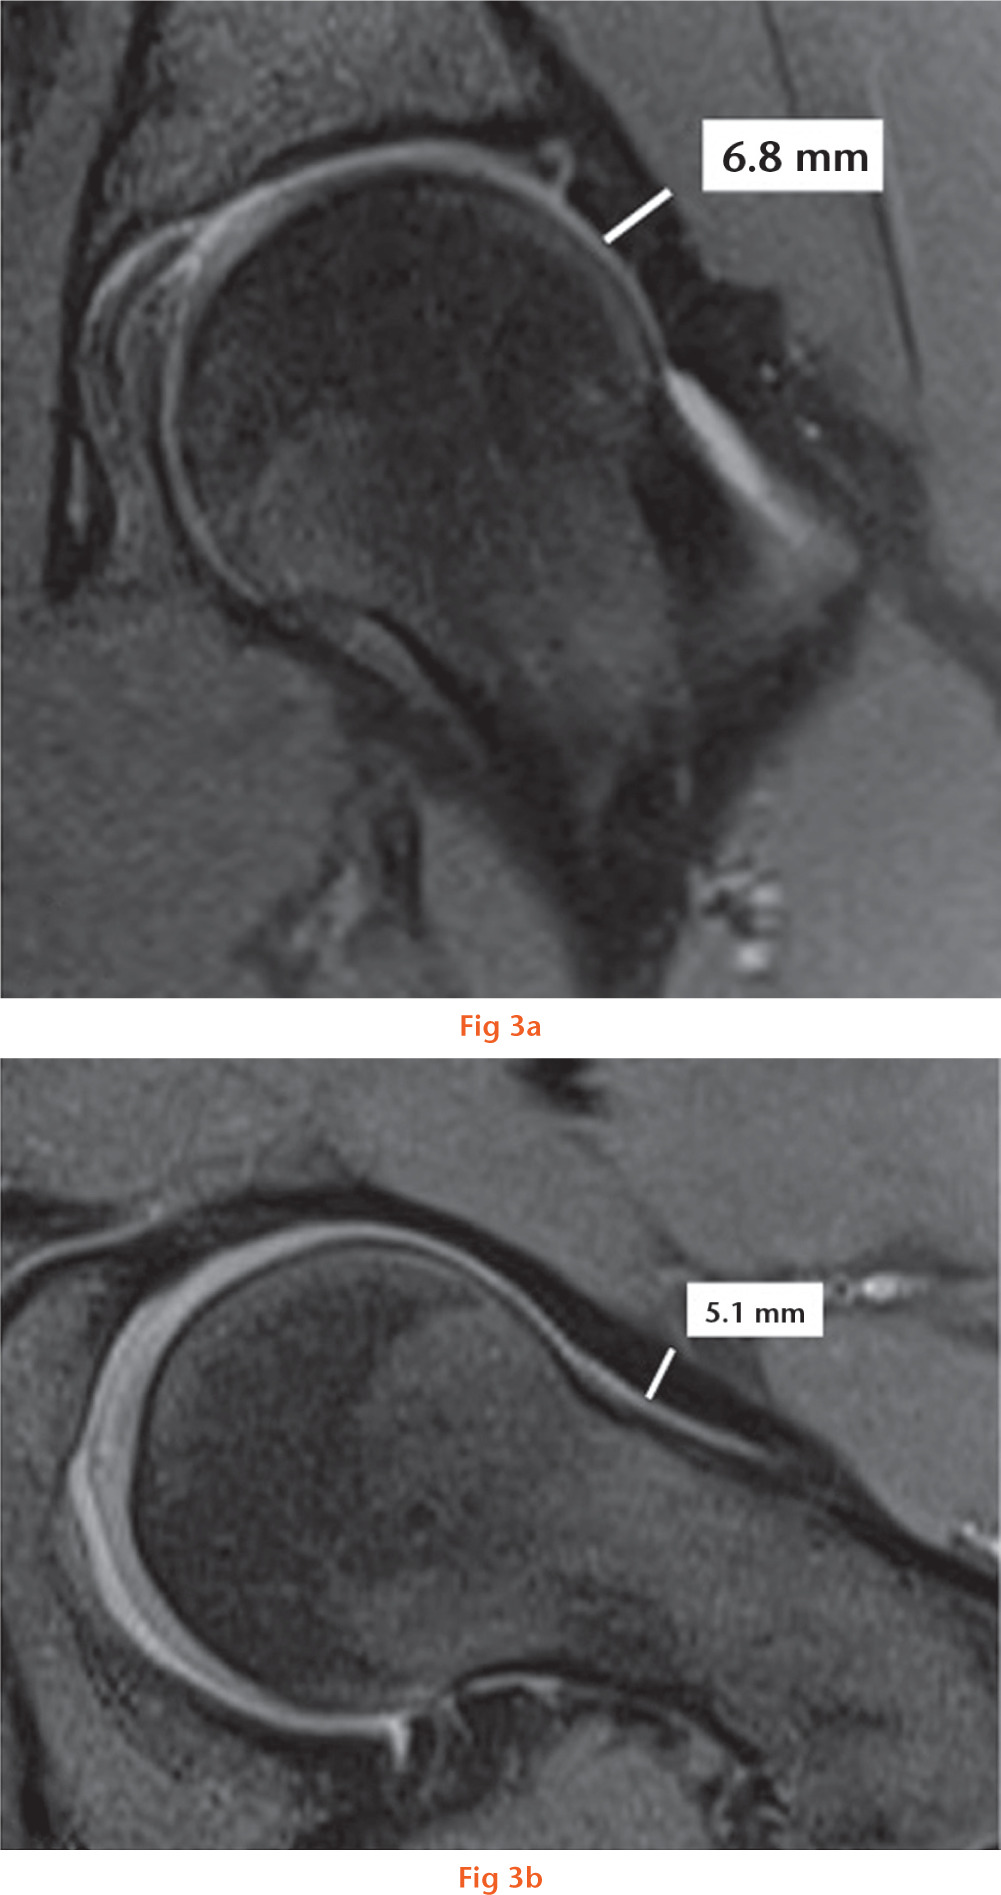  
          Measurement of the (a) superior (12:00) capsule thickness on an oblique coronal MRI image of a non-FAI subject (b) anterior (3:00) capsule thickness on an oblique axial MRI image of a non-FAI subject.
        